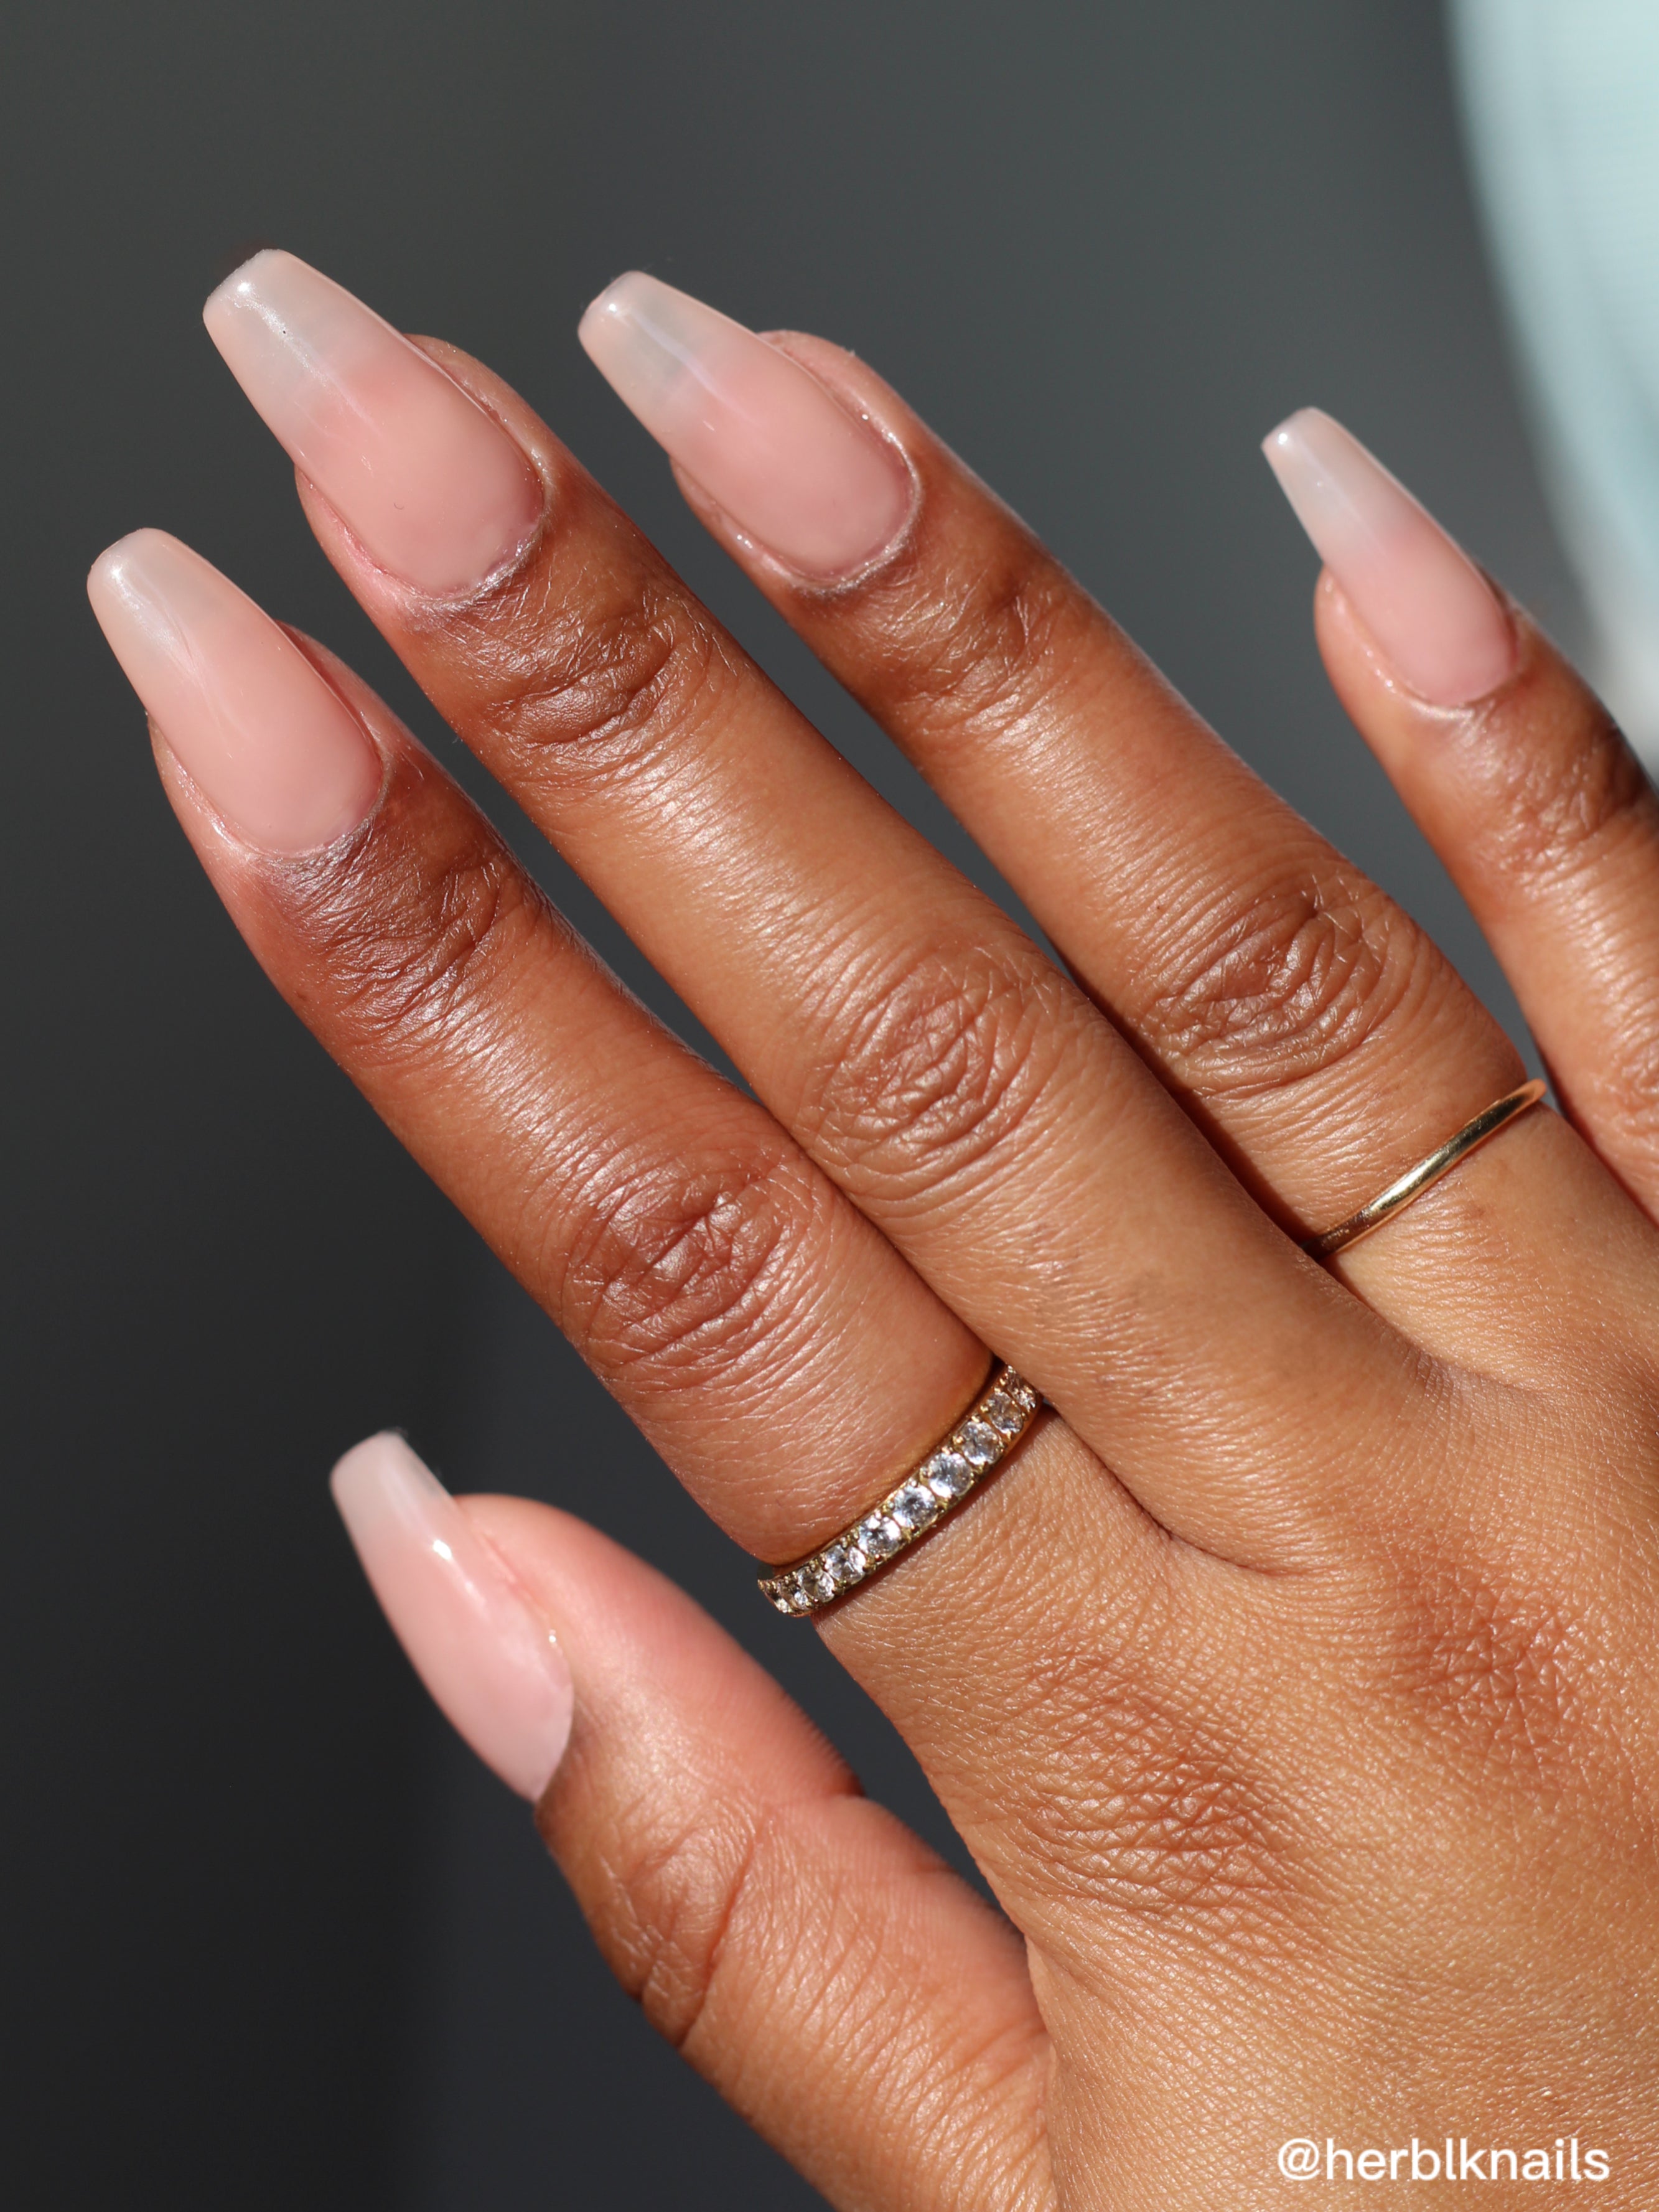 24 Pink Clouds Long Press On Nails Coffin Natural nude glue on white s –  surethings.net